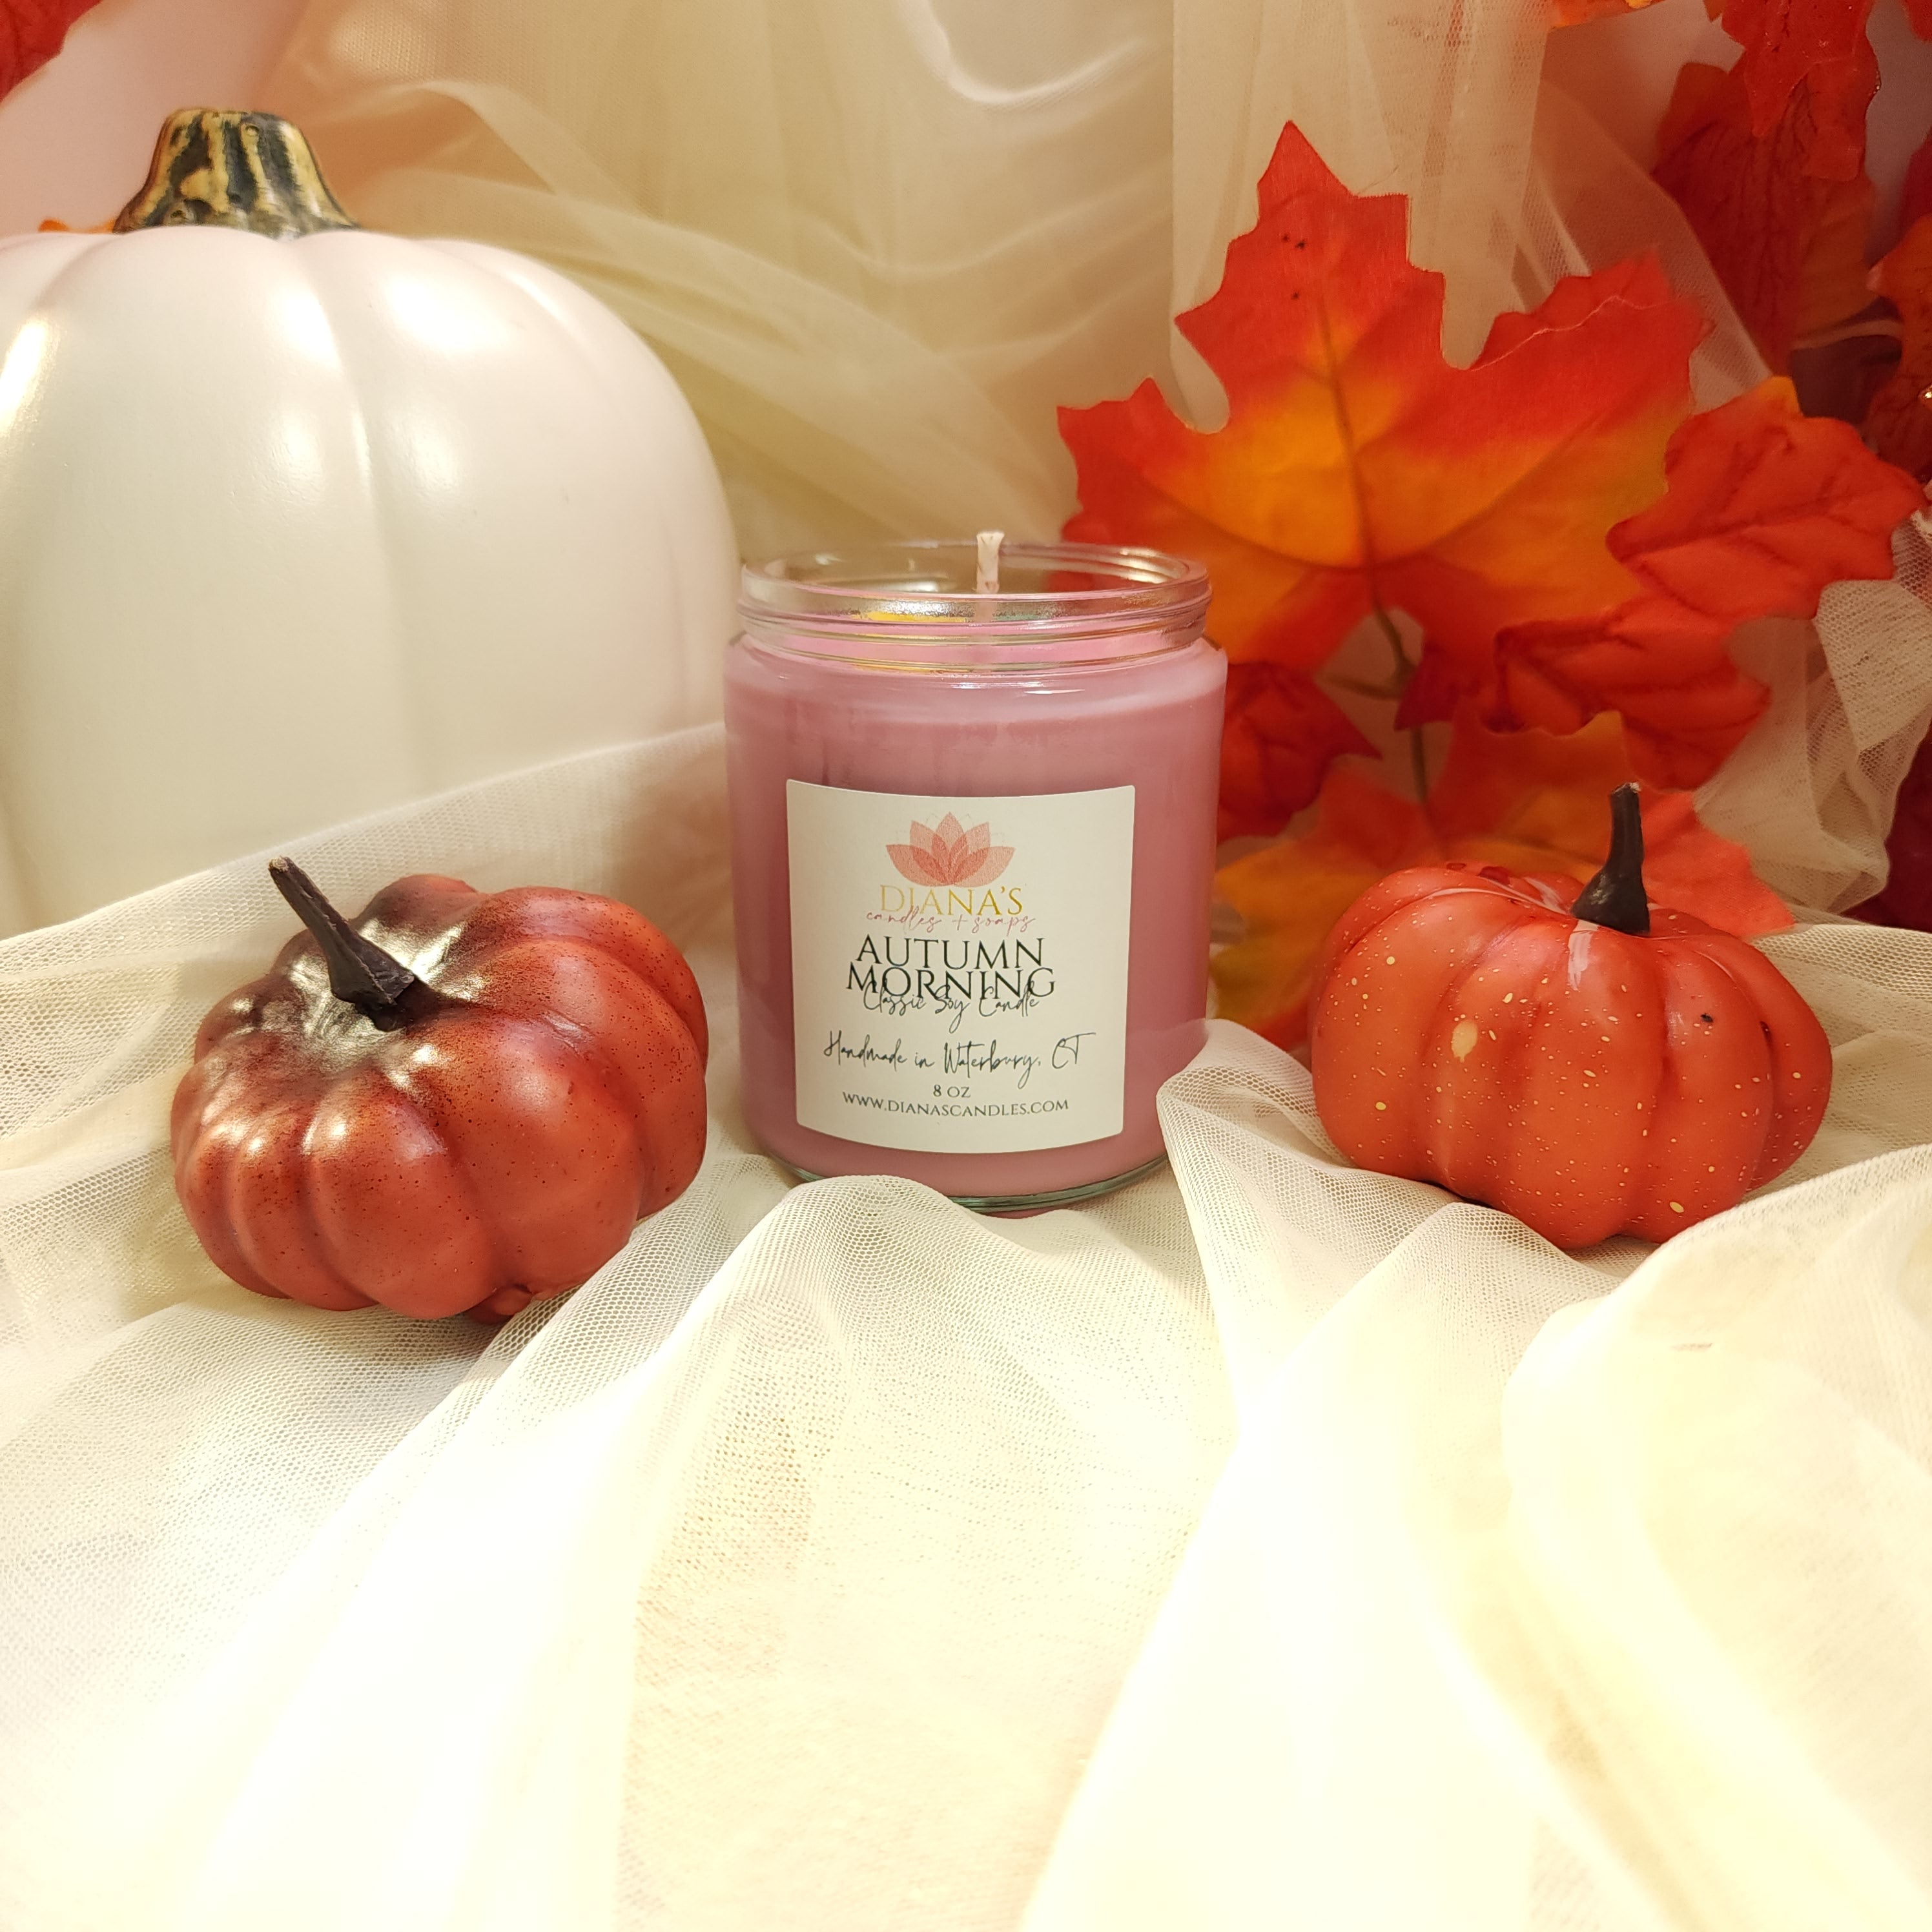 Autumn Morning Candle Diana's Candles and Soaps 